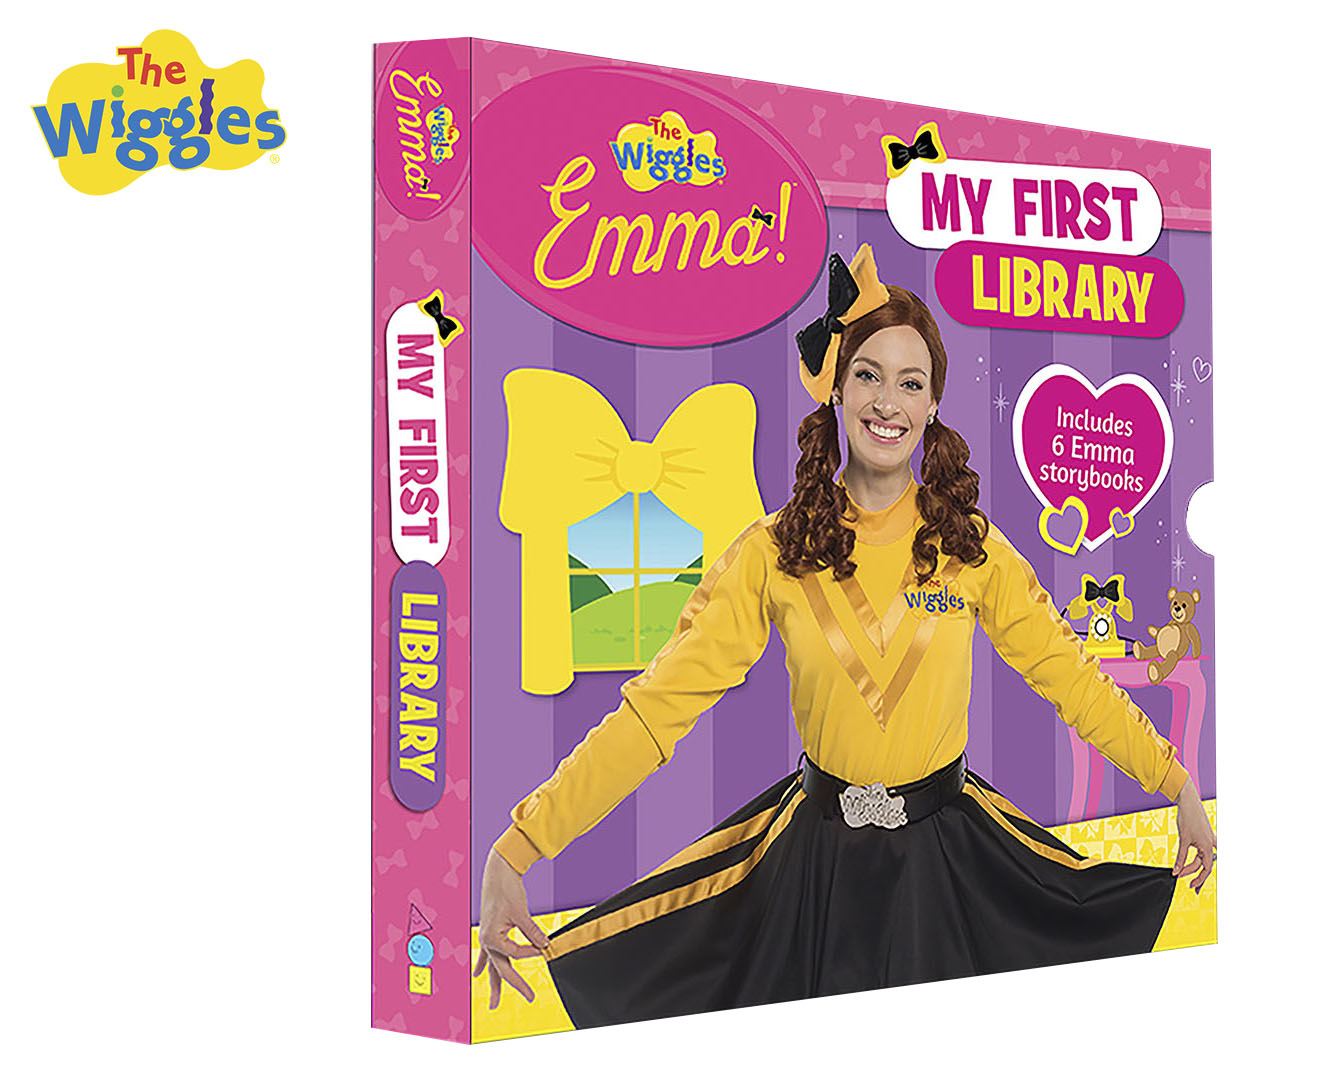 The Wiggles Emma My First Library Hardcover 6 Book Slipcase Set